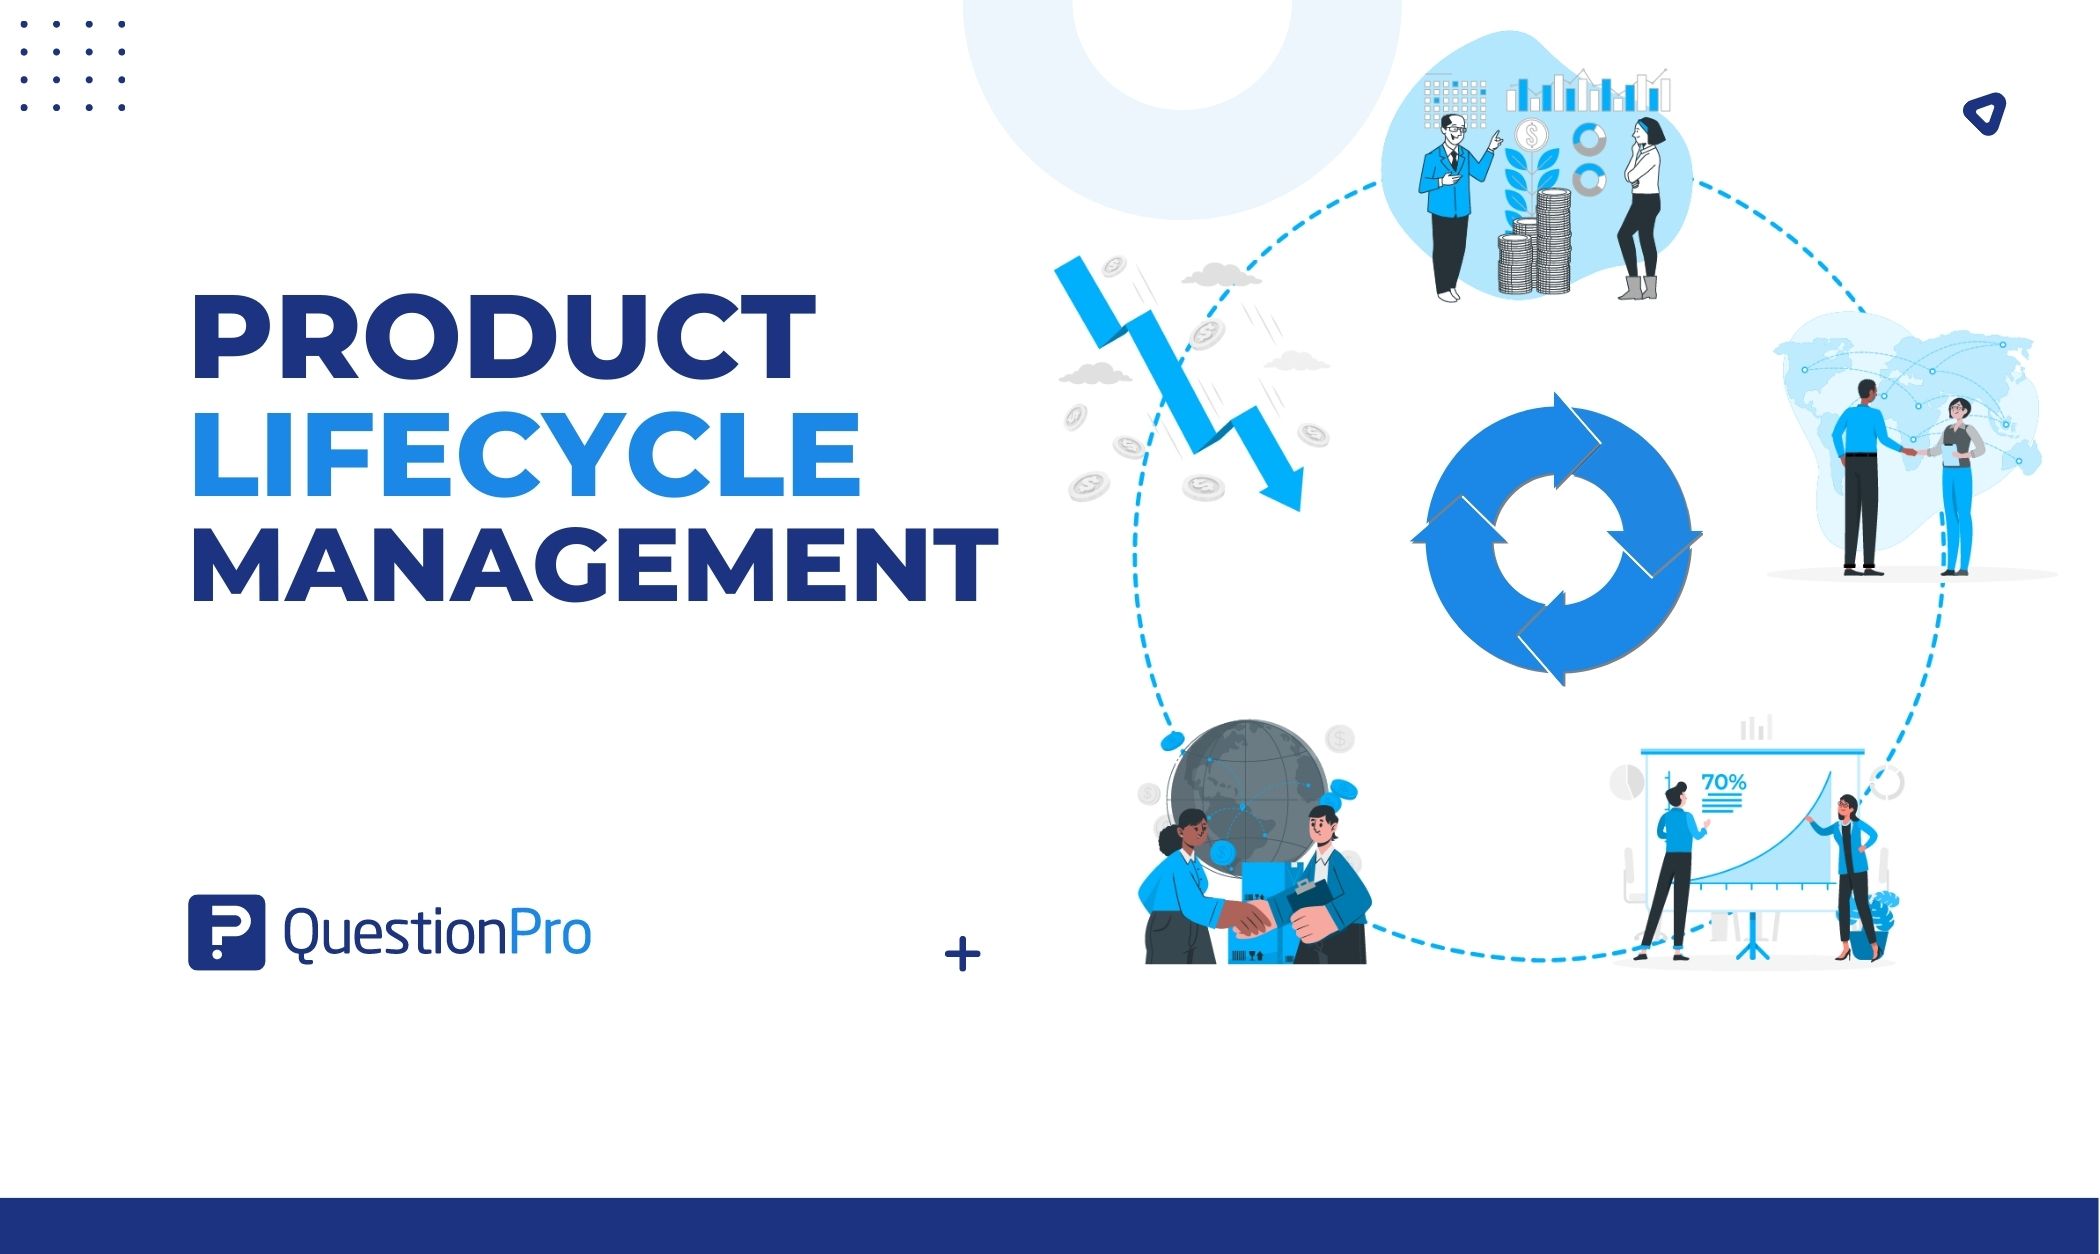 Product lifecycle management helps companies track, manage, and shape product development. This useful guide makes new product development easy.